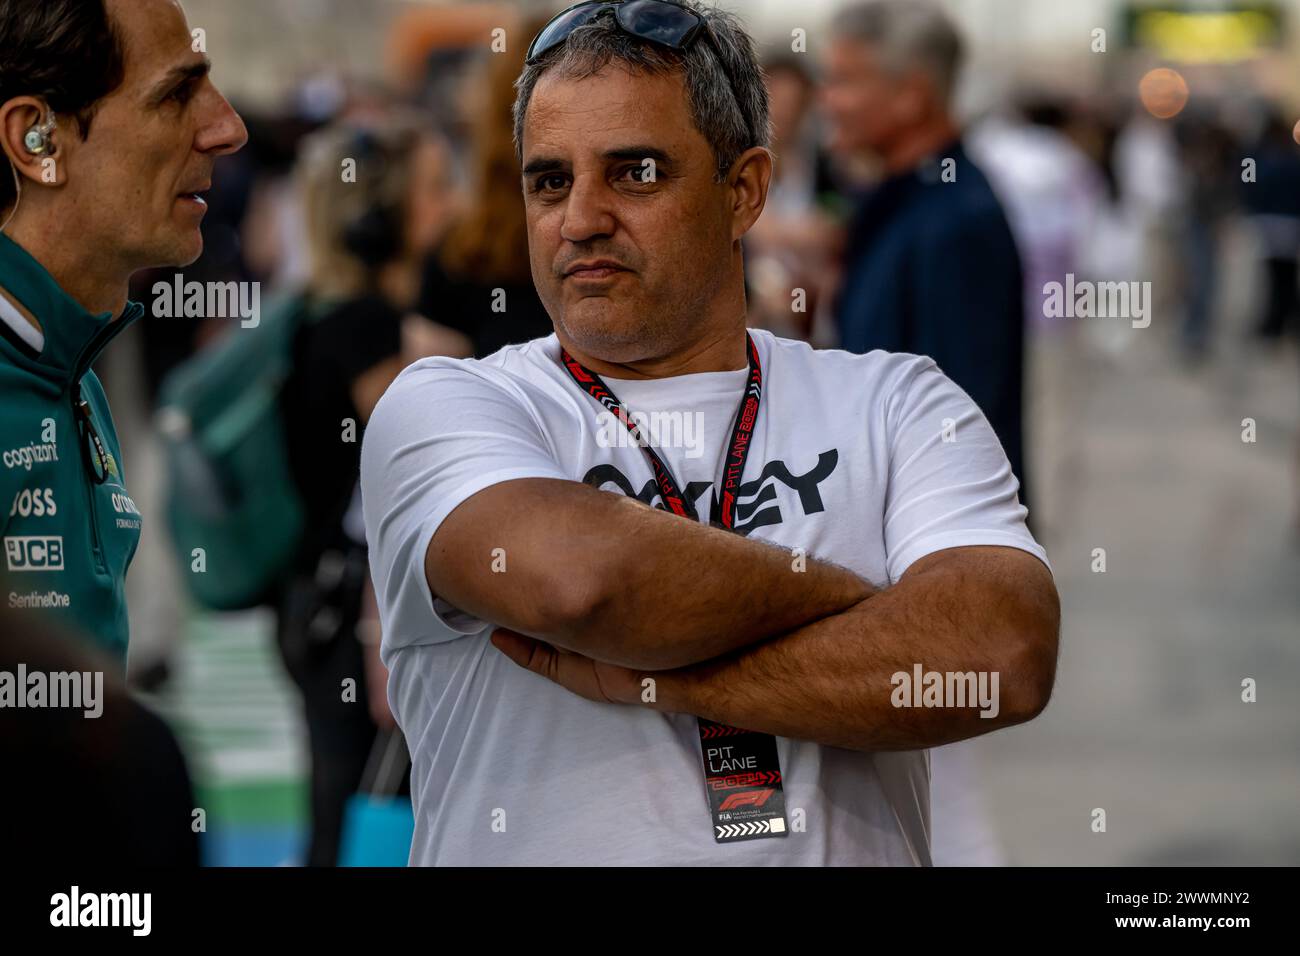 BAHRAIN INTERNATIONAL CIRCUIT, BAHRAIN - MARCH 02: Juan Pablo Montoya, former racing driver, during the Bahrain Grand Prix at Bahrain International Circuit on Sunday March 02, 2024 in Sakhir, Bahrain. (Photo by Michael Potts/BSR Agency) Credit: BSR Agency/Alamy Live News Stock Photo